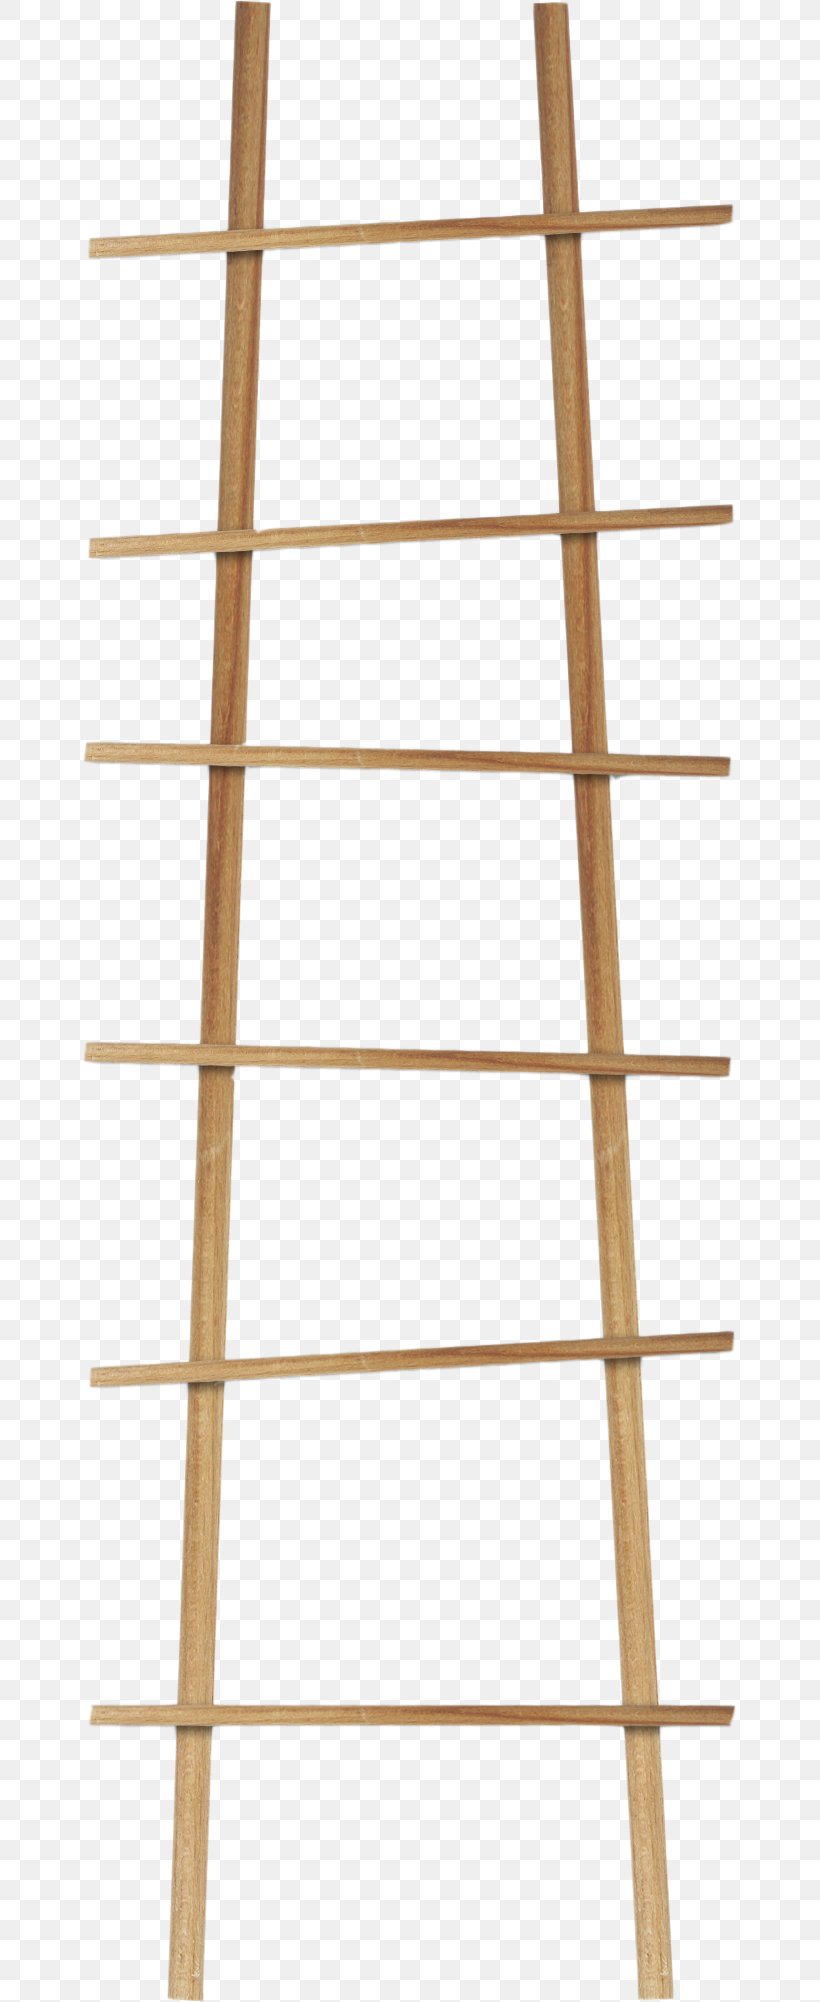 Wood Ladder Stairs Clip Art, PNG, 655x2002px, Wood, Albom, Google Images, Ladder, Material Download Free